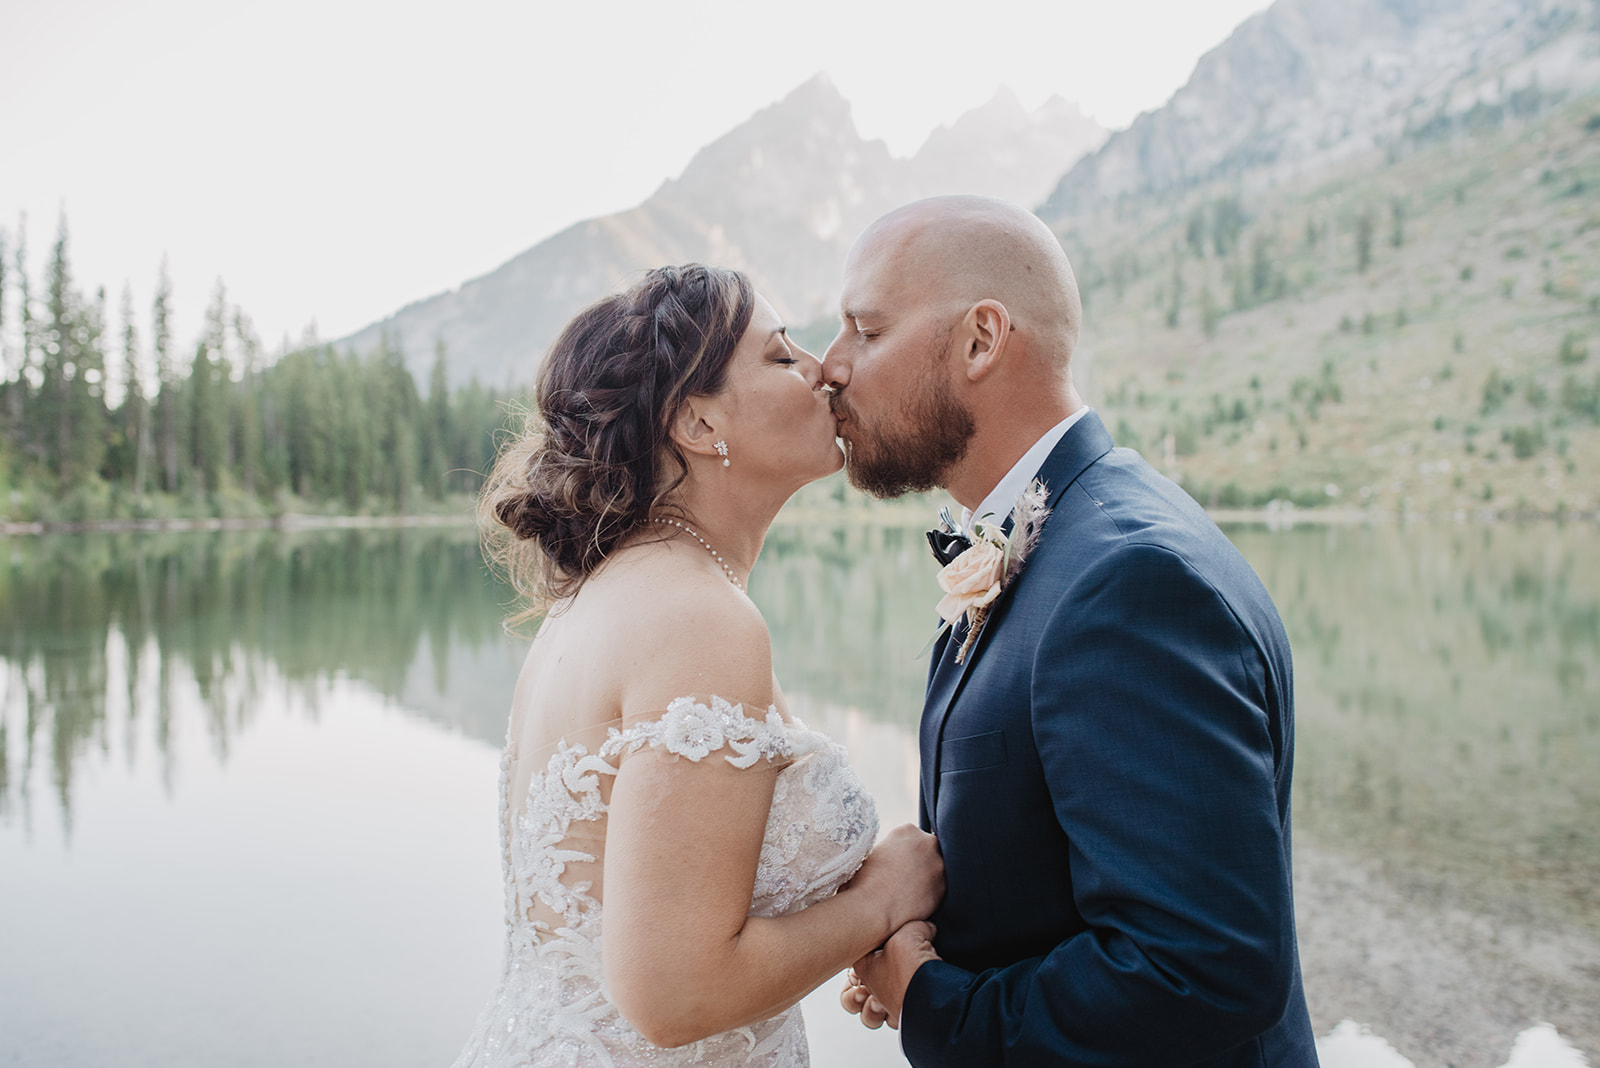 Jackson Hole wedding venues for eloping in the Tetons, bride and groom holding each others hands to their chests and kissing with the Tetons and String Lake behind them